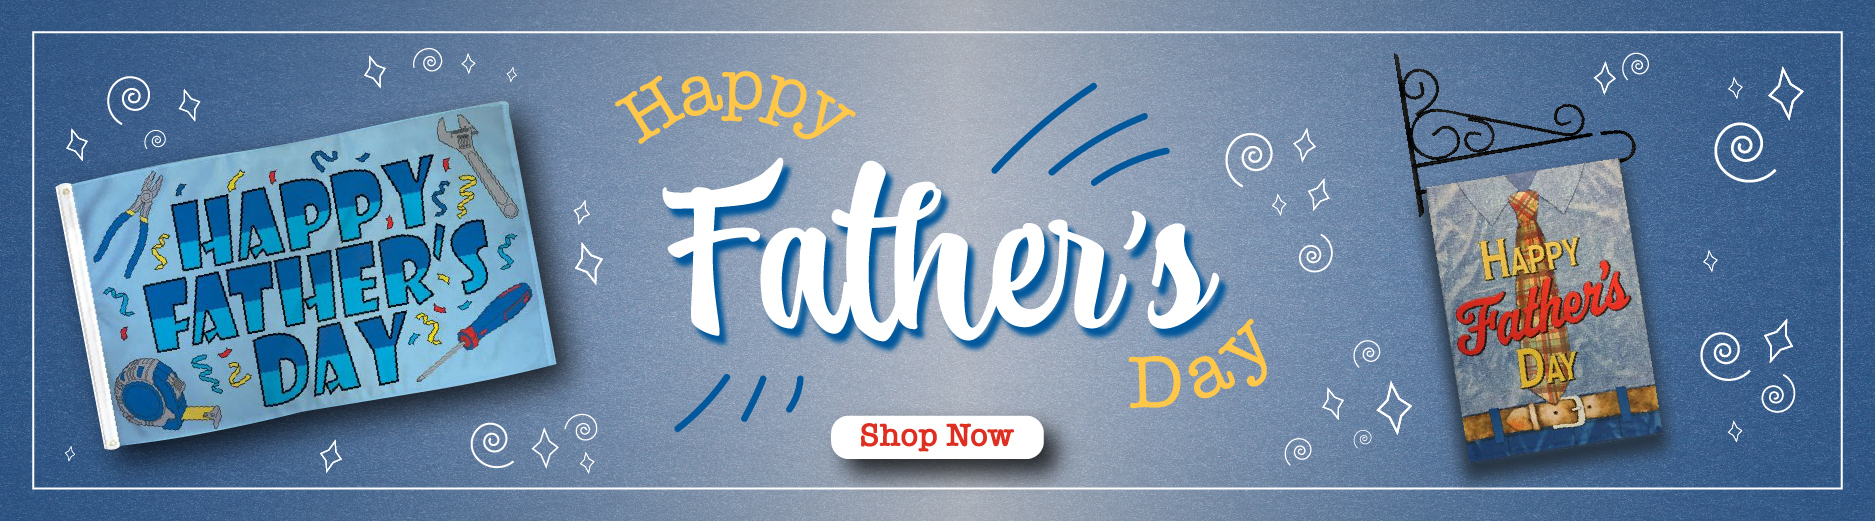 Happy Father's Day - shop Now